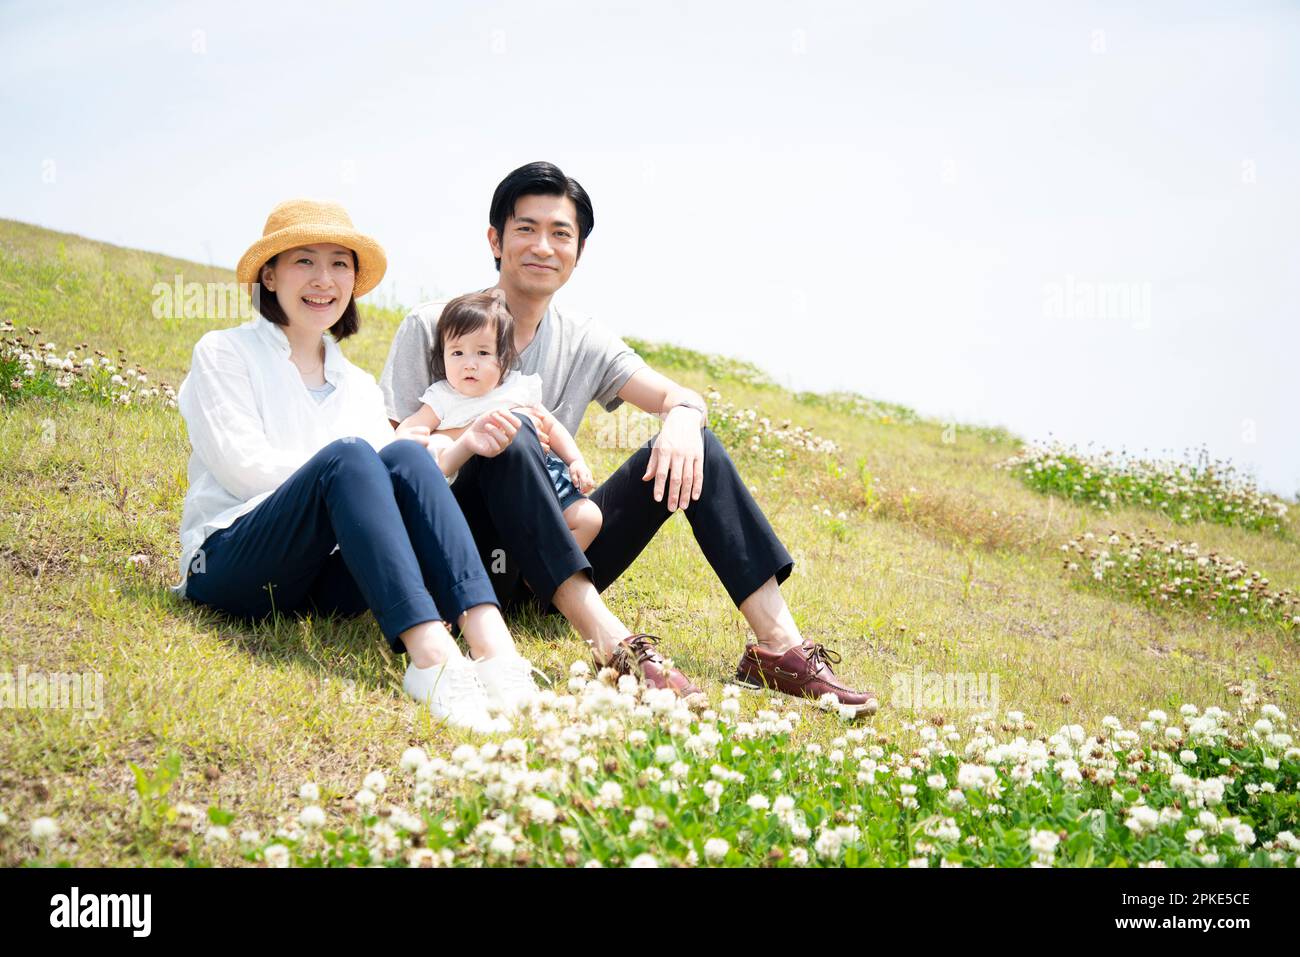 Family sitting on lawn Stock Photo